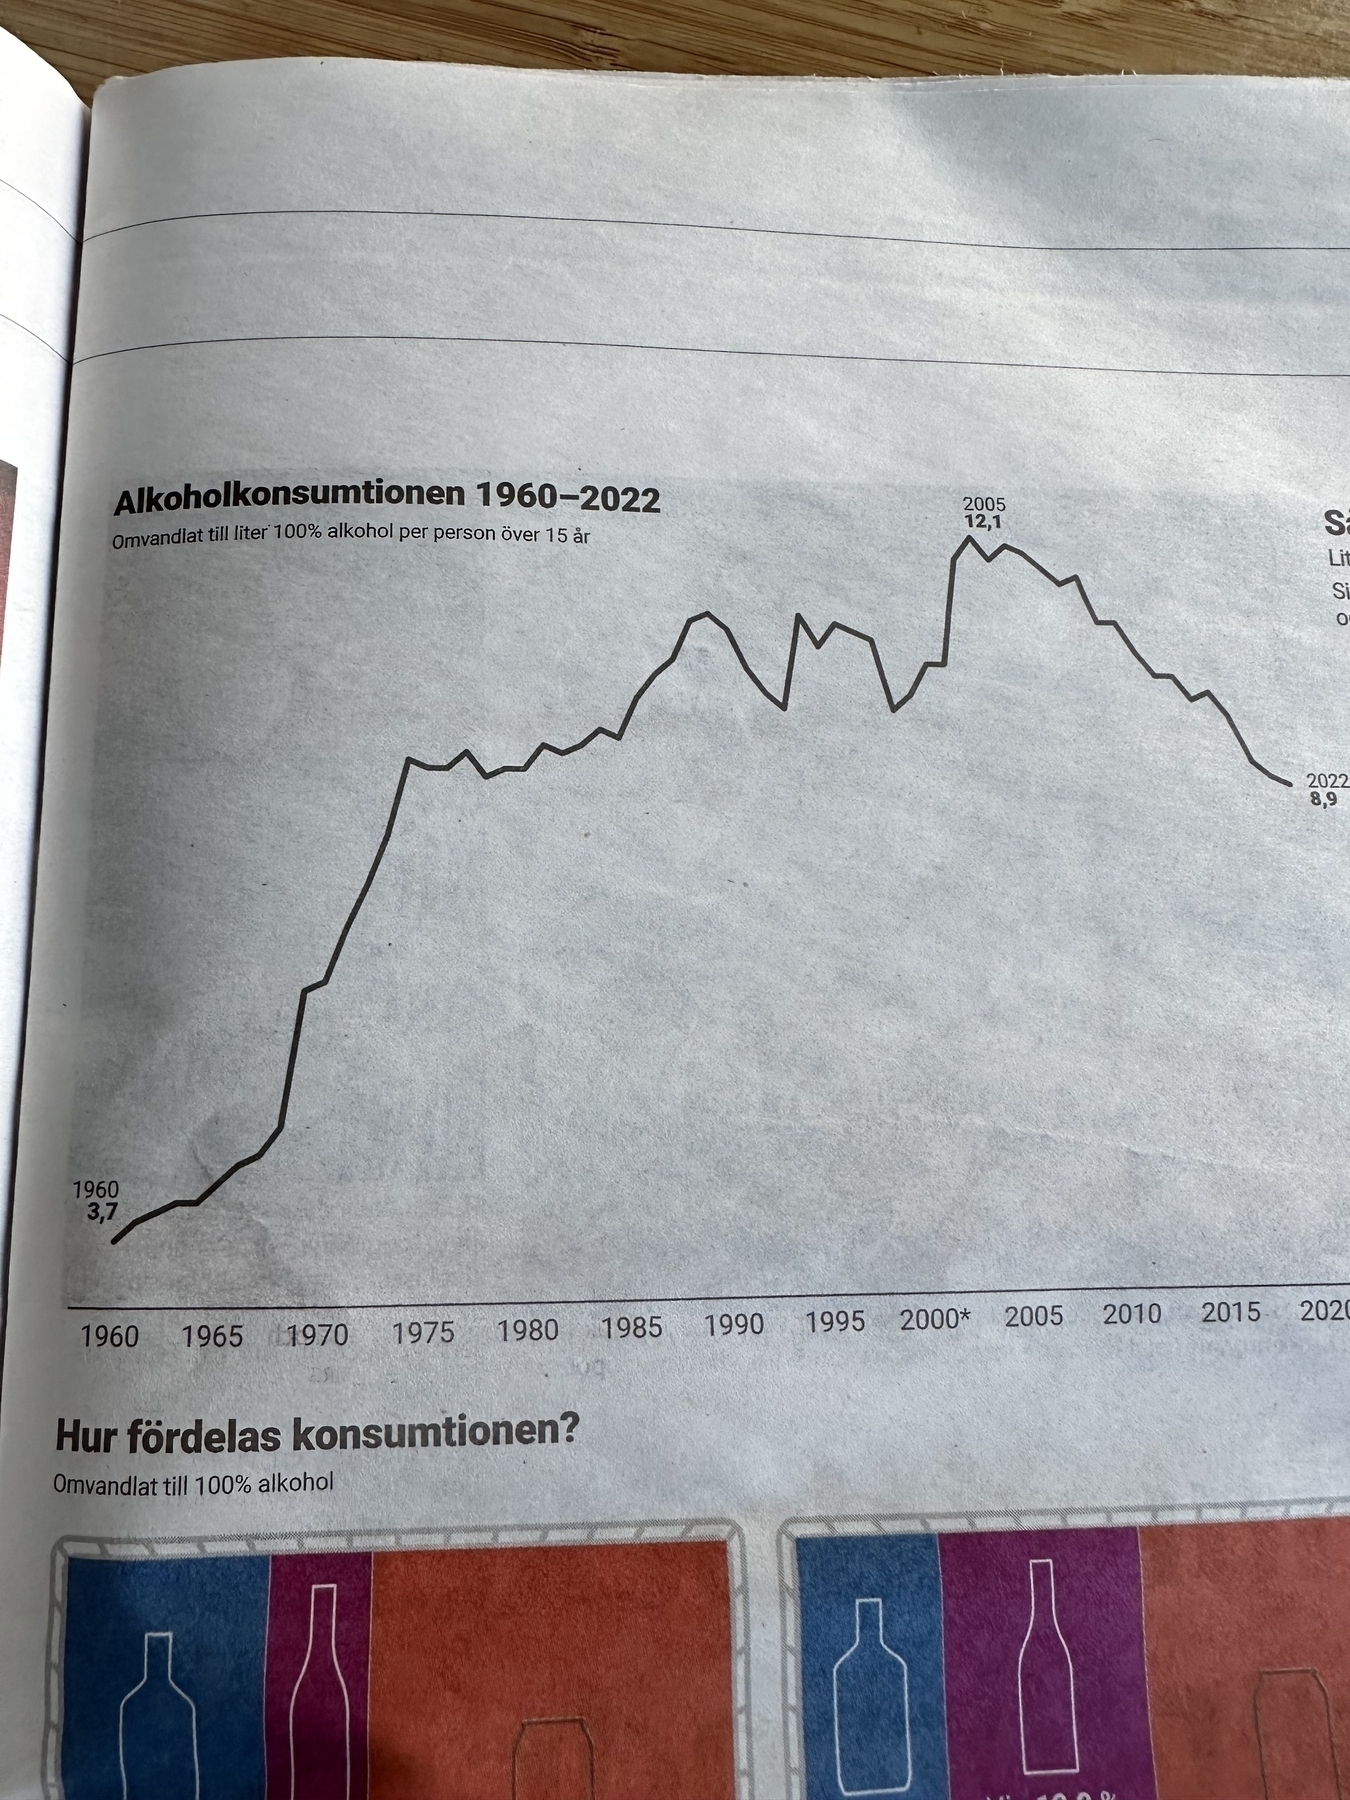 Graph of Finnish alcohol consumption in liters of 100% alcohol. Heavily going up from 3.7 liters in 1960 to 2005 12.1 liters. There is a sharp decline to 2022 and 8.9 liters